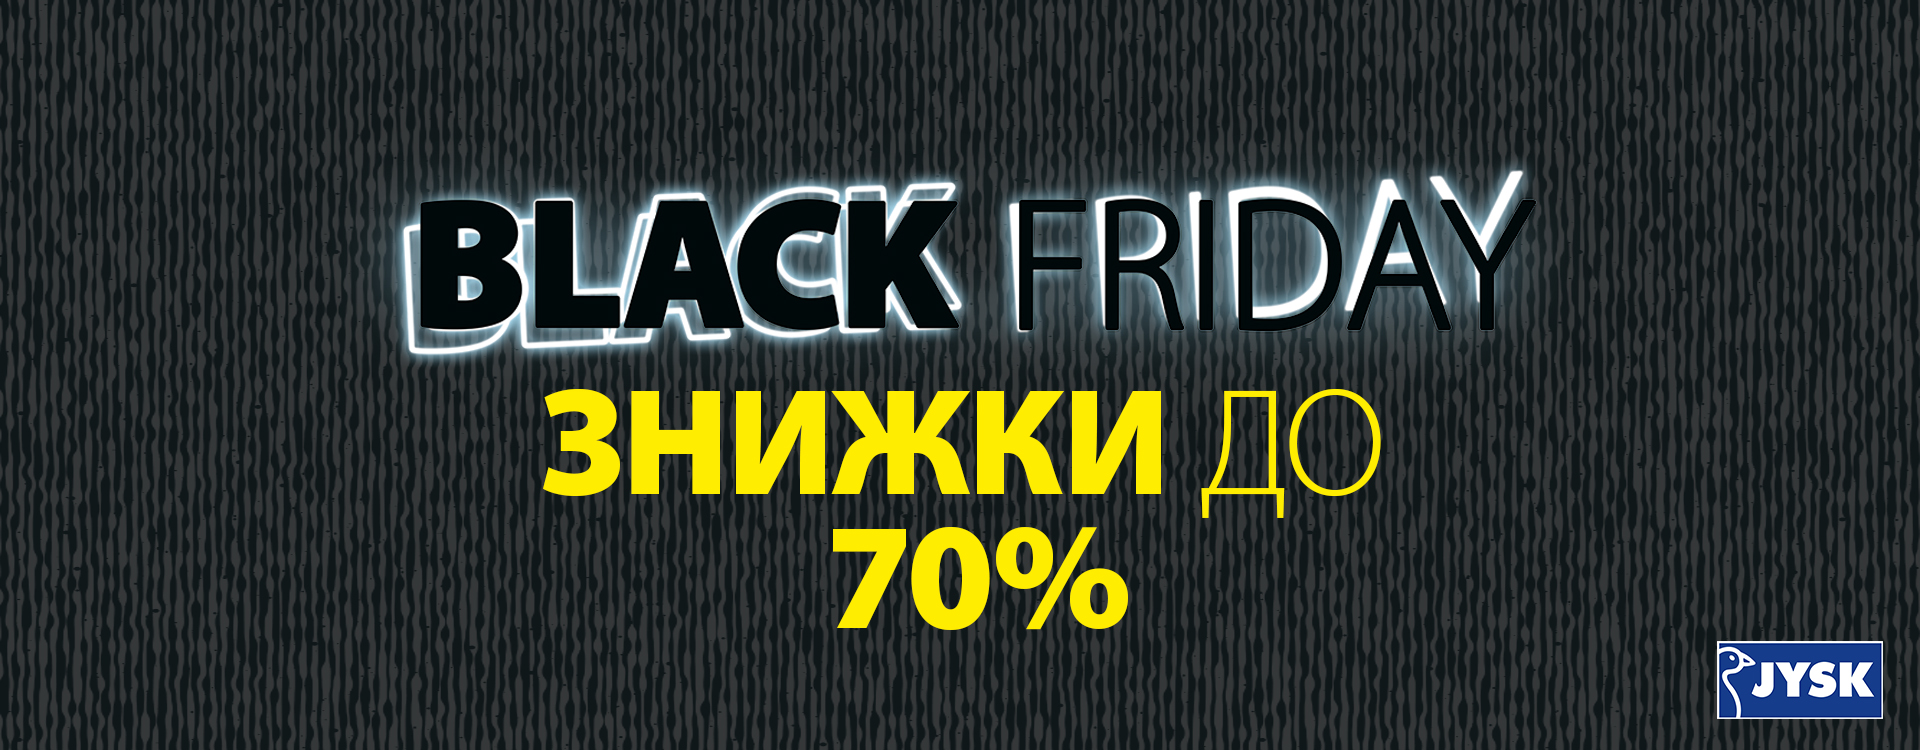 DISCOUNTS up to 70% on many products at JYSK